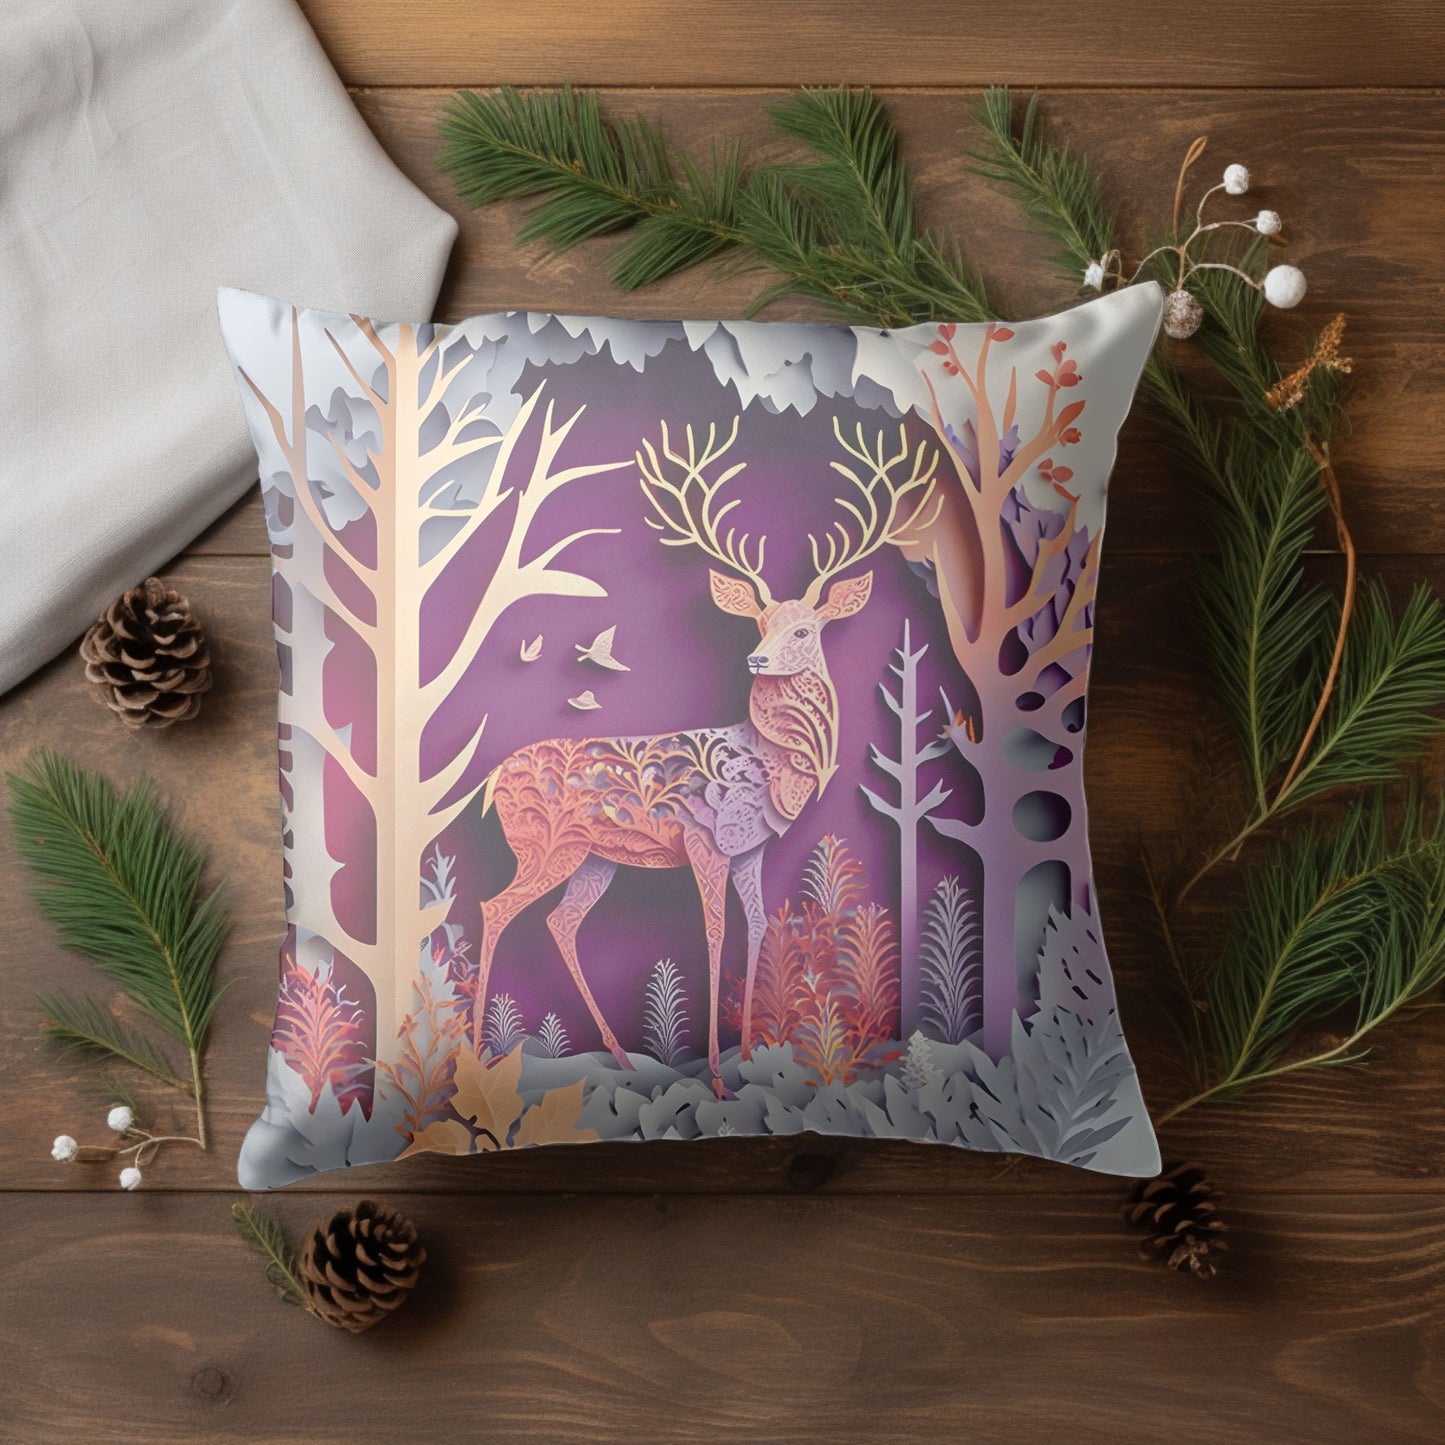 Christmas Reindeer Patterned Cushion Cover for Your Home